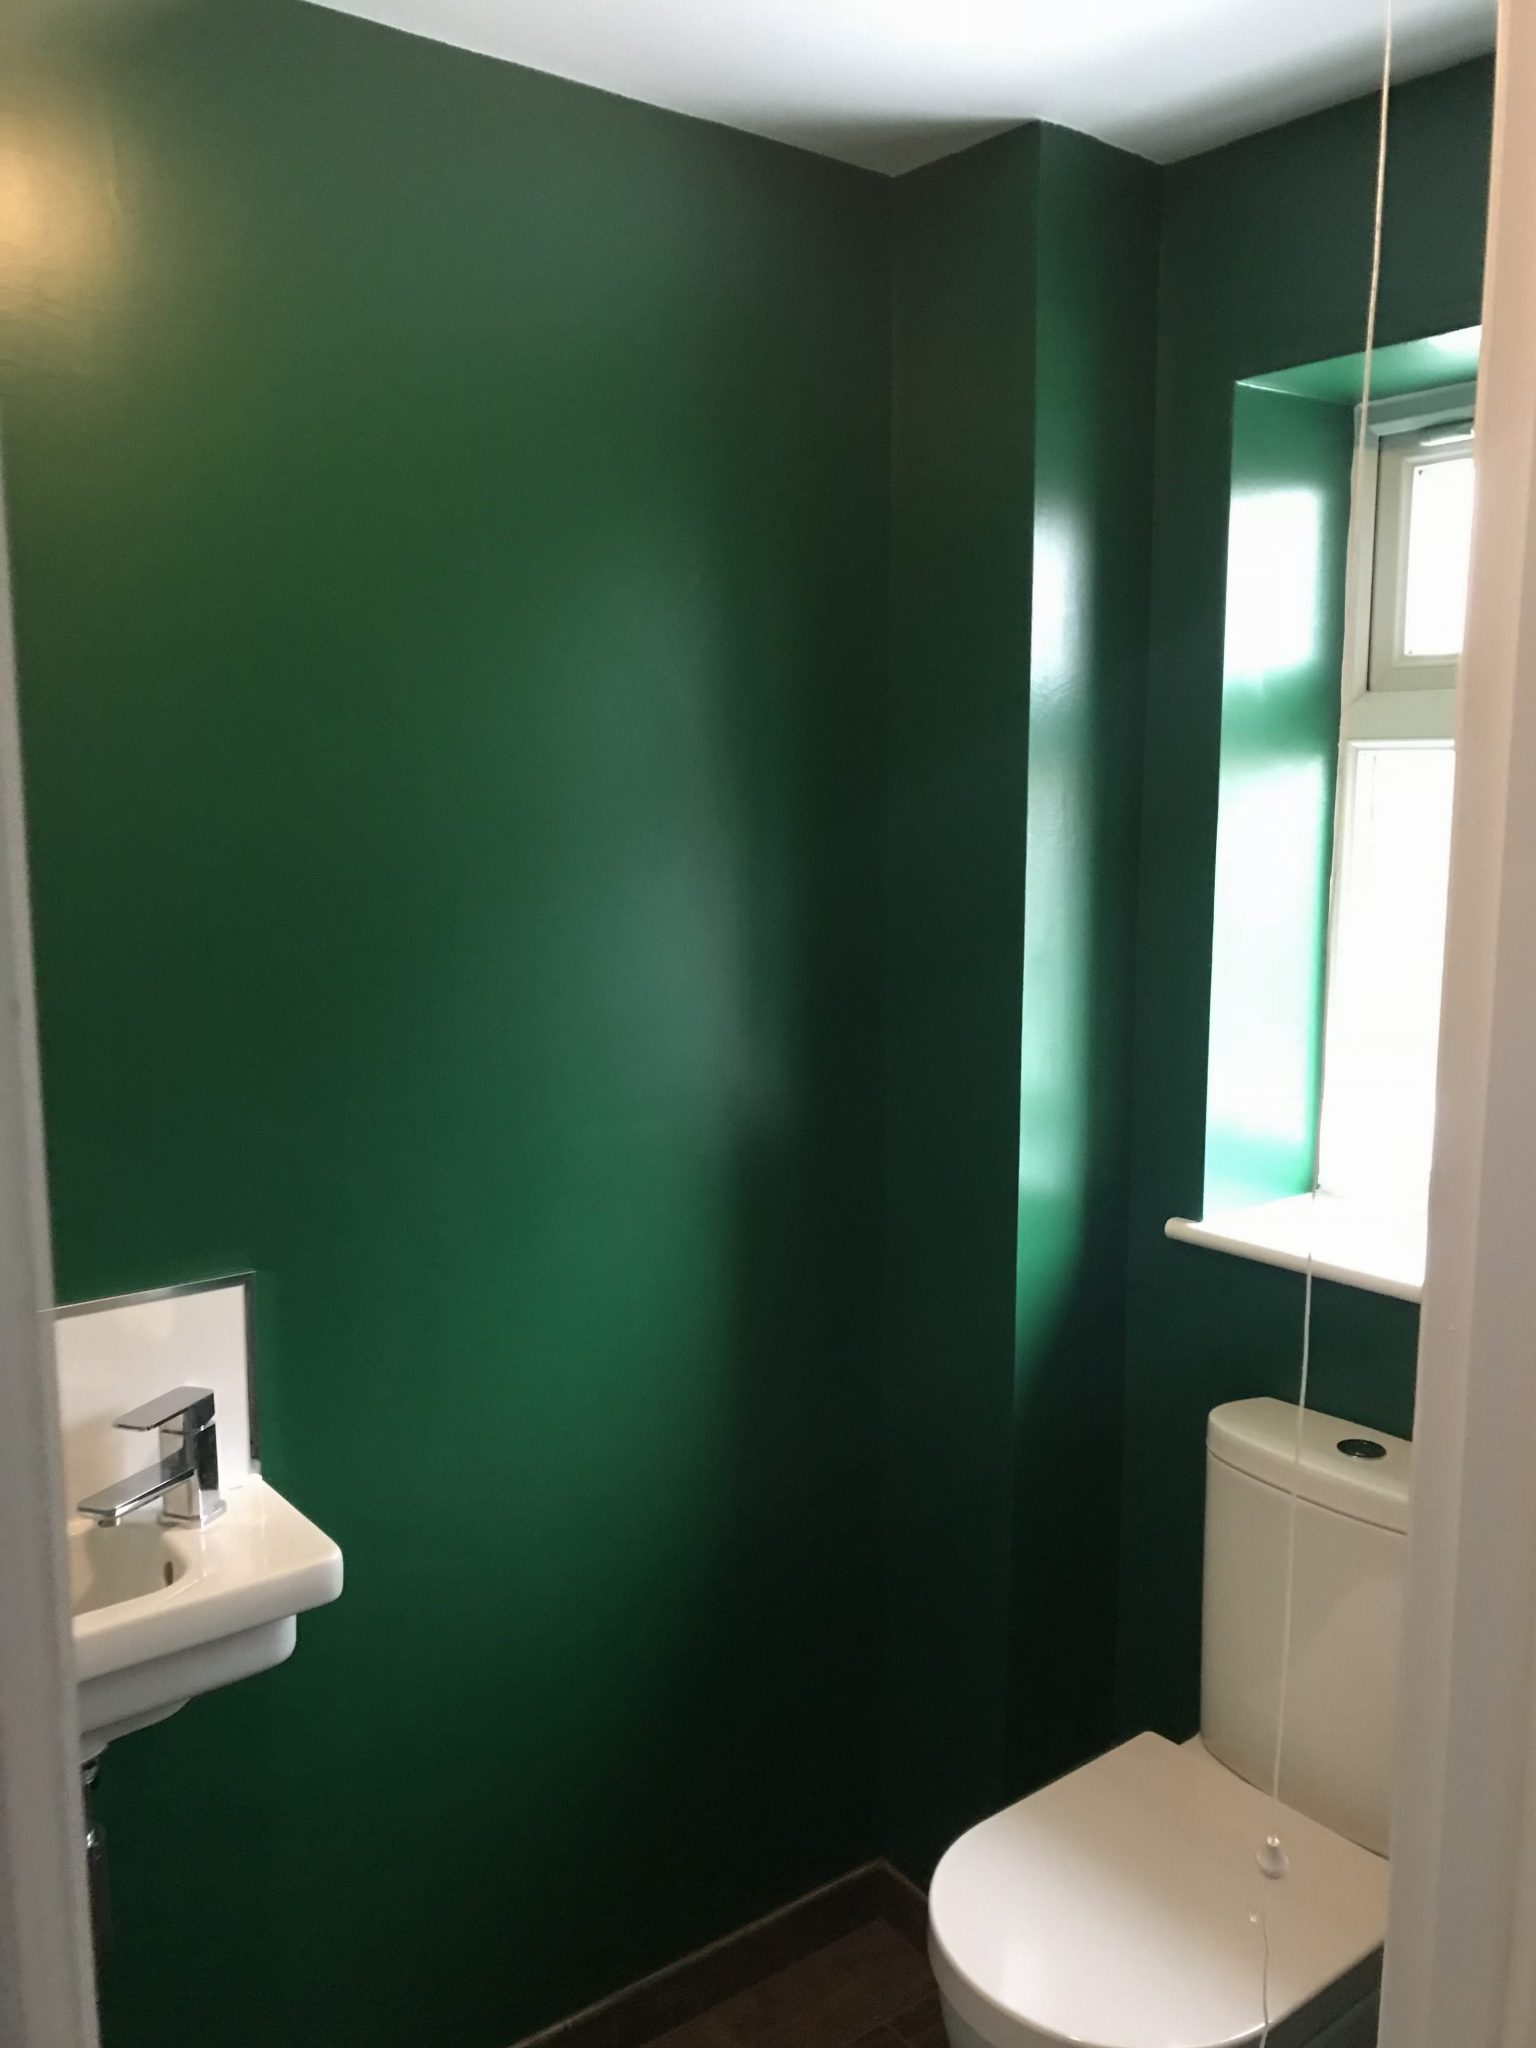 A newly renovated ensuite bathroom in Bicester.